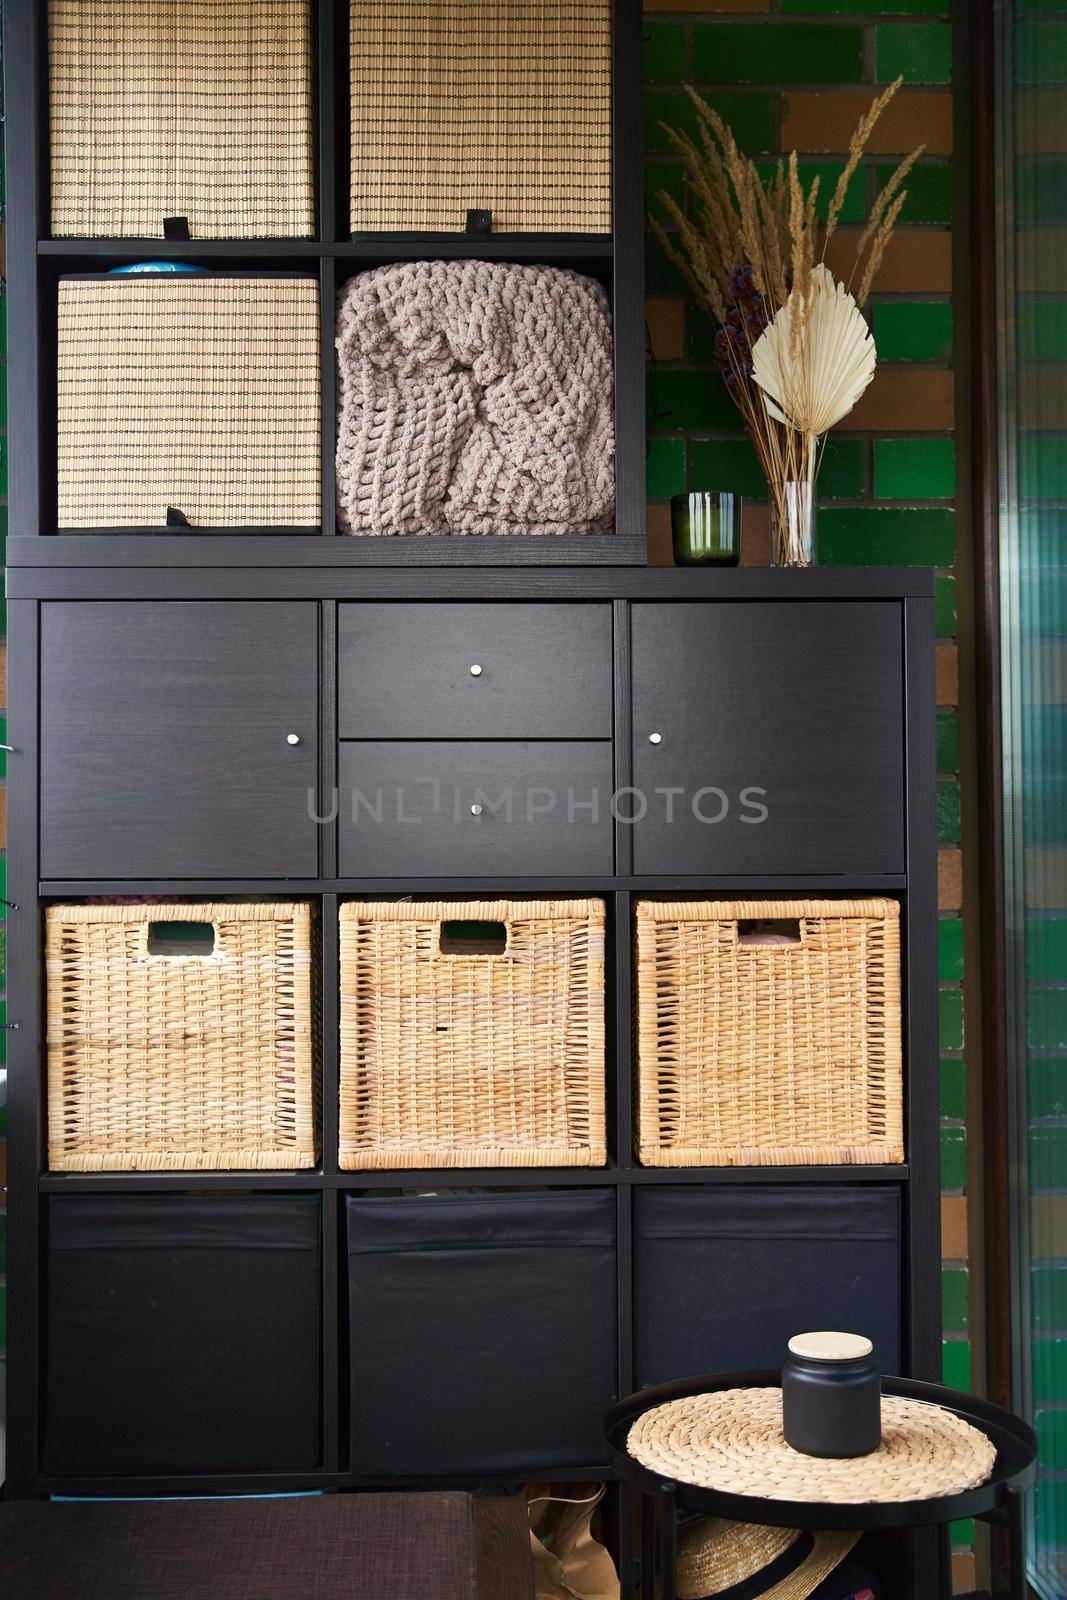 Wicker boxes for things on the shelves. Wardrobe for storage of things by driver-s